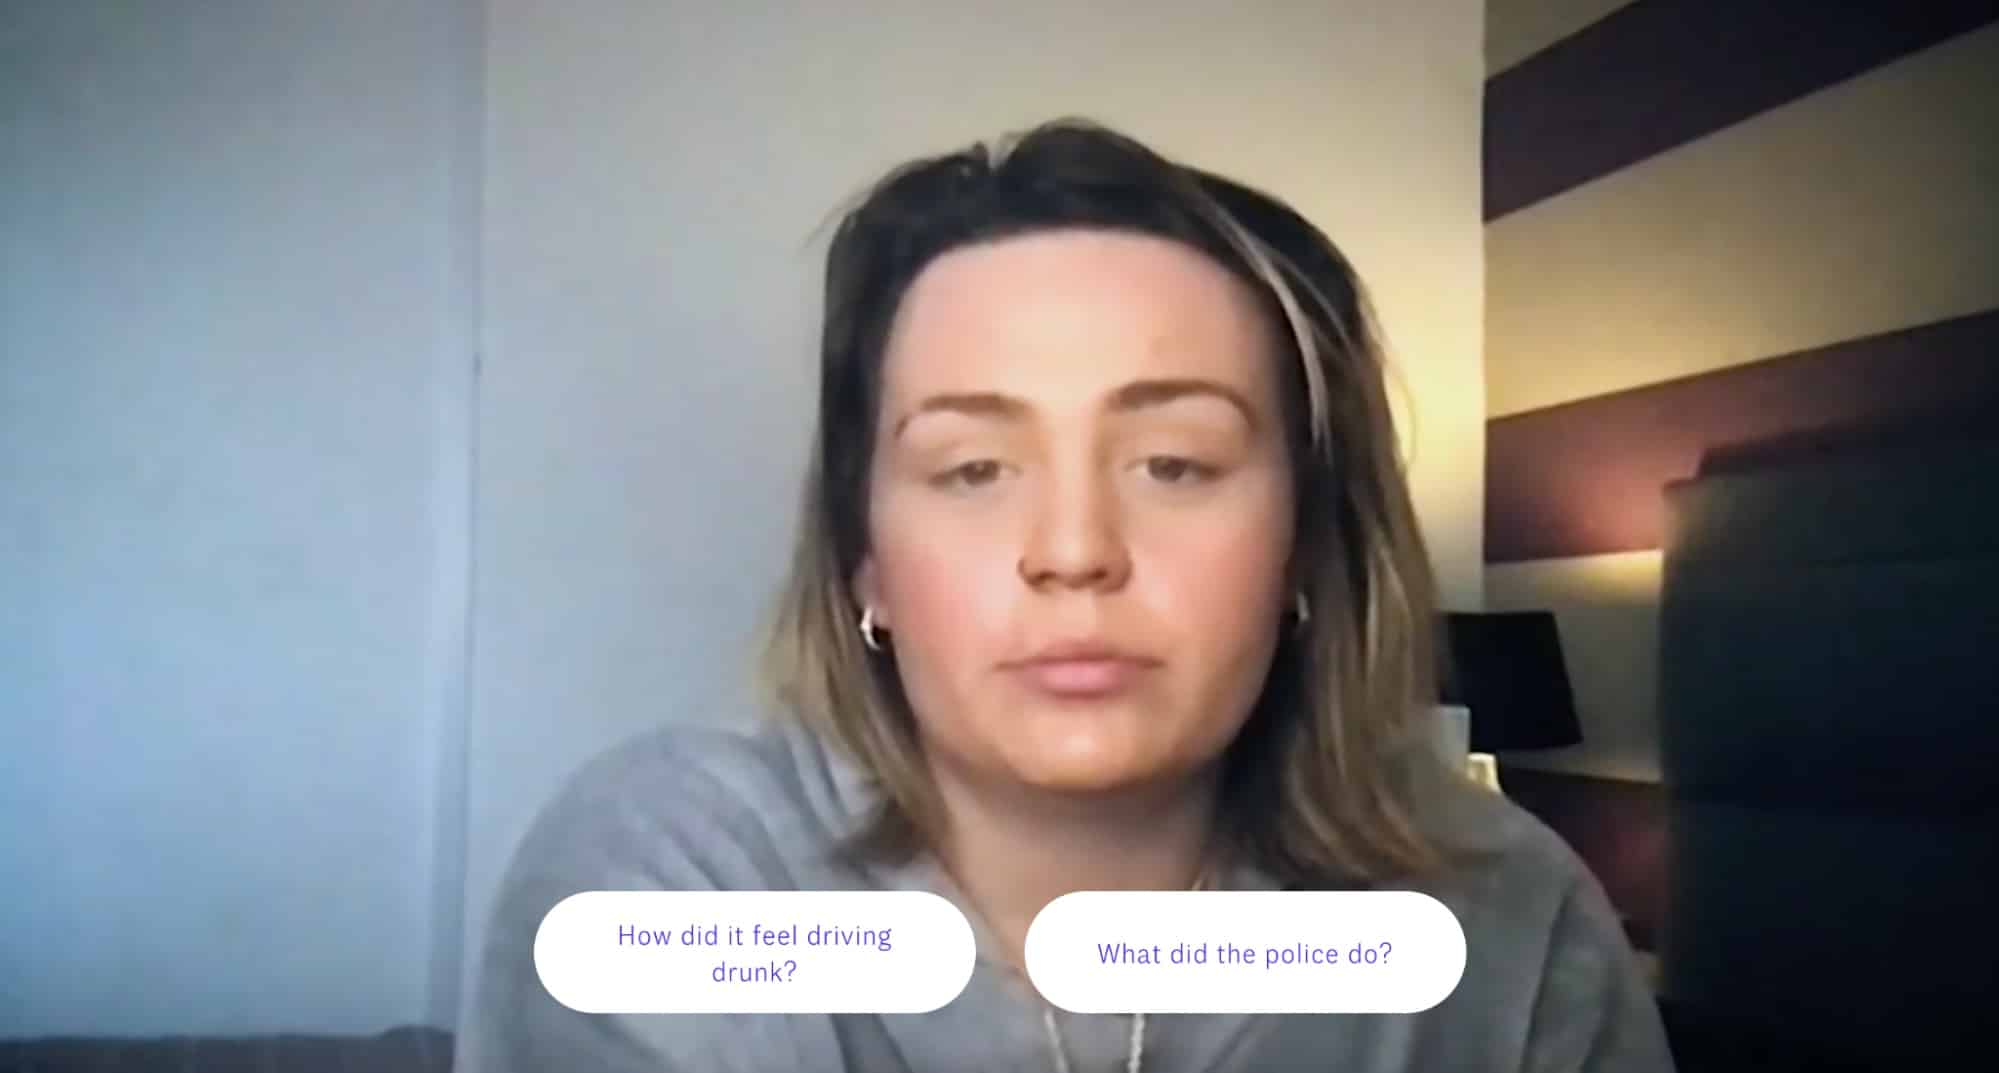 A lady on a video call awaits a question - the viewer is offered a choice of two questions at the bottom of the screen.